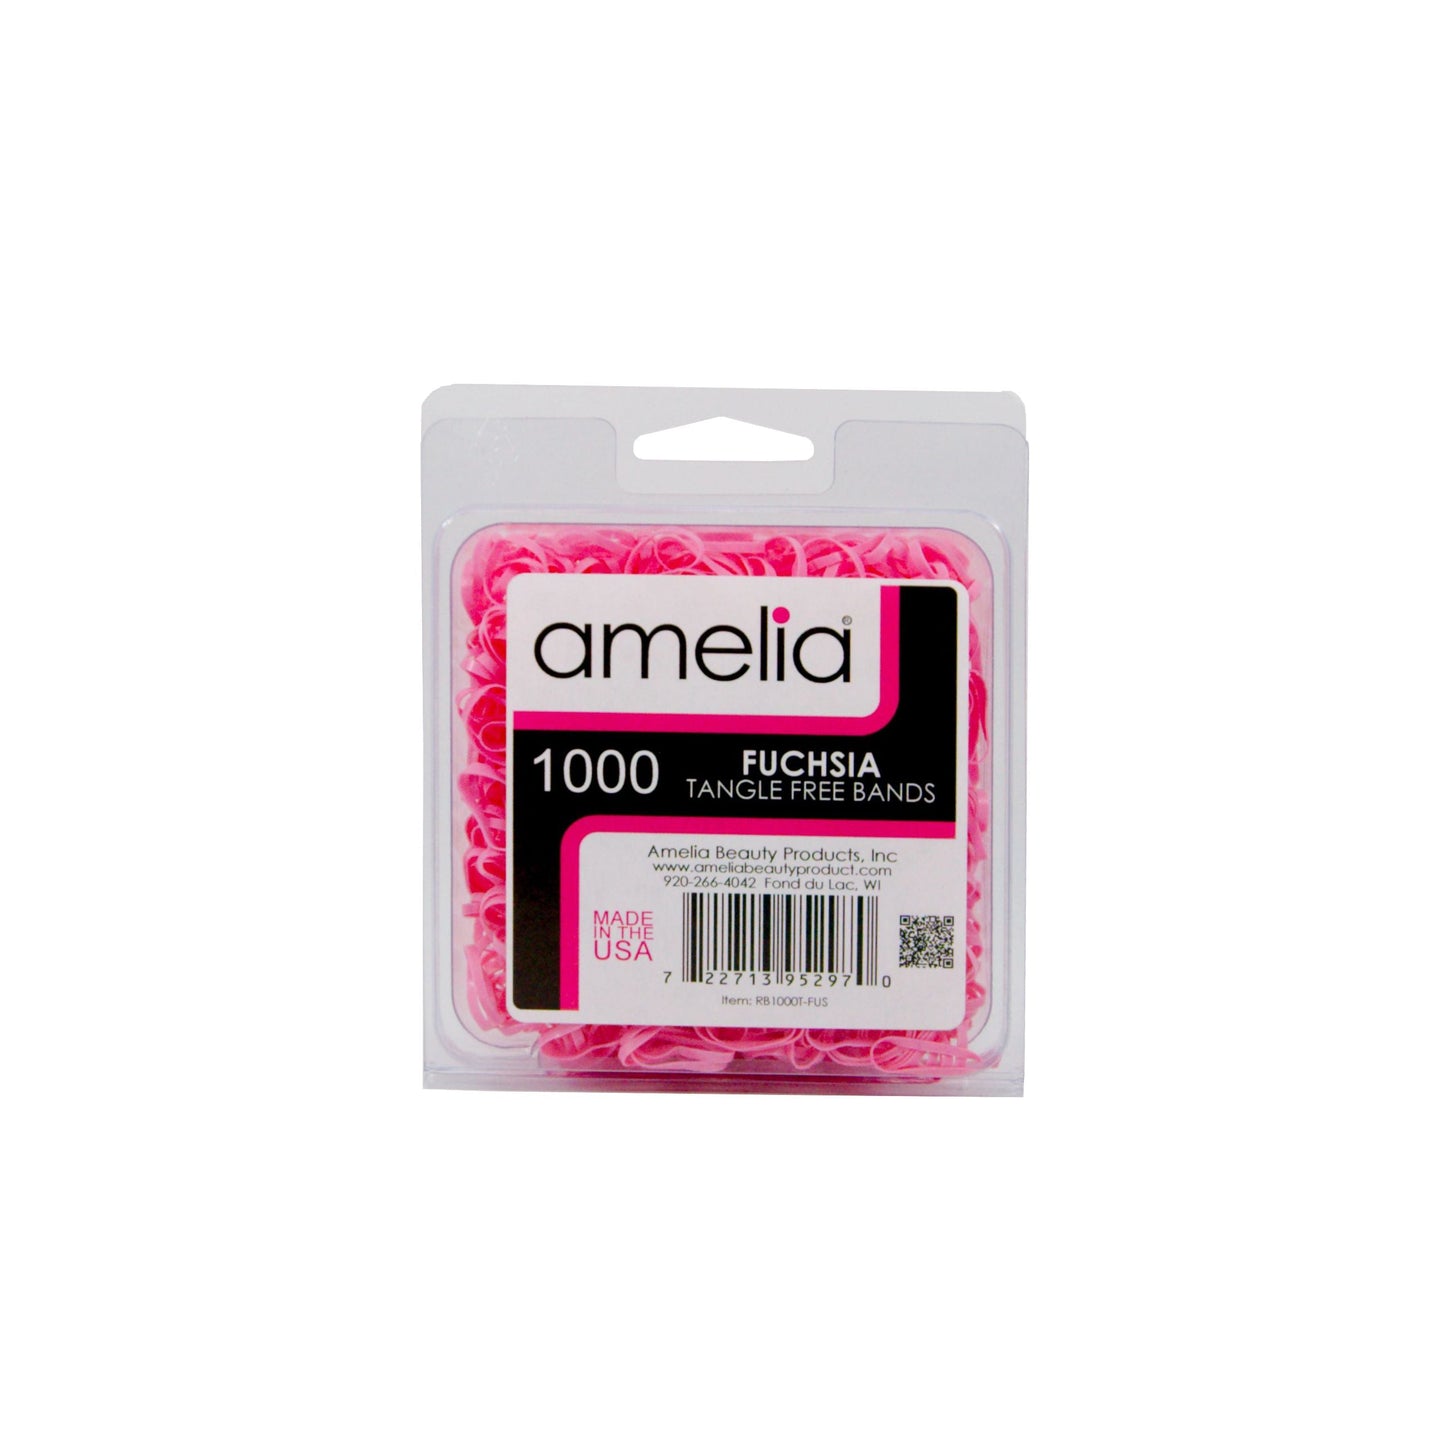 Amelia Beauty | 1/2in, Fuchsia, Tangle Free Elastic Pony Tail Holders | Made in USA, Ideal for Ponytails, Braids, Twists. For Women, Girls. Pain Free, Snag Free, Easy Off | 1000 Pack - 12 Retail Packs